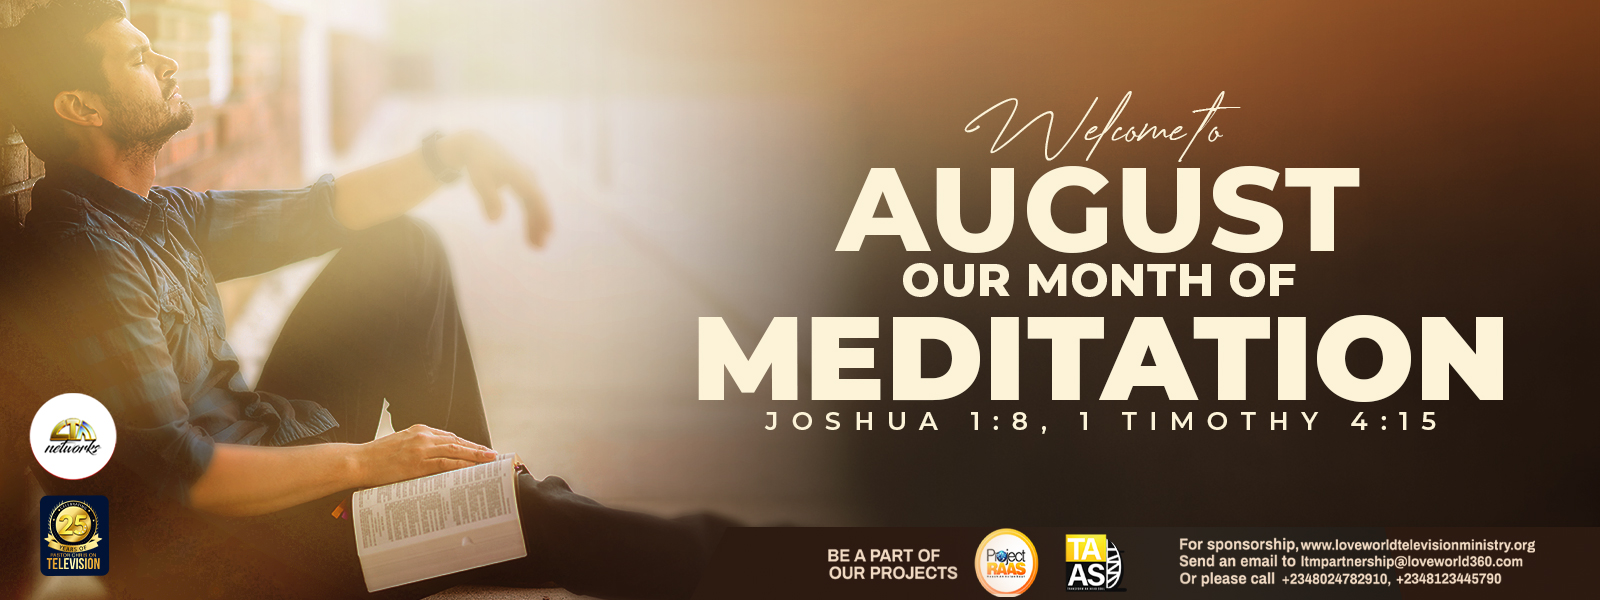 WELCOME TO AUGUST THE MONTH OF MEDITATION 